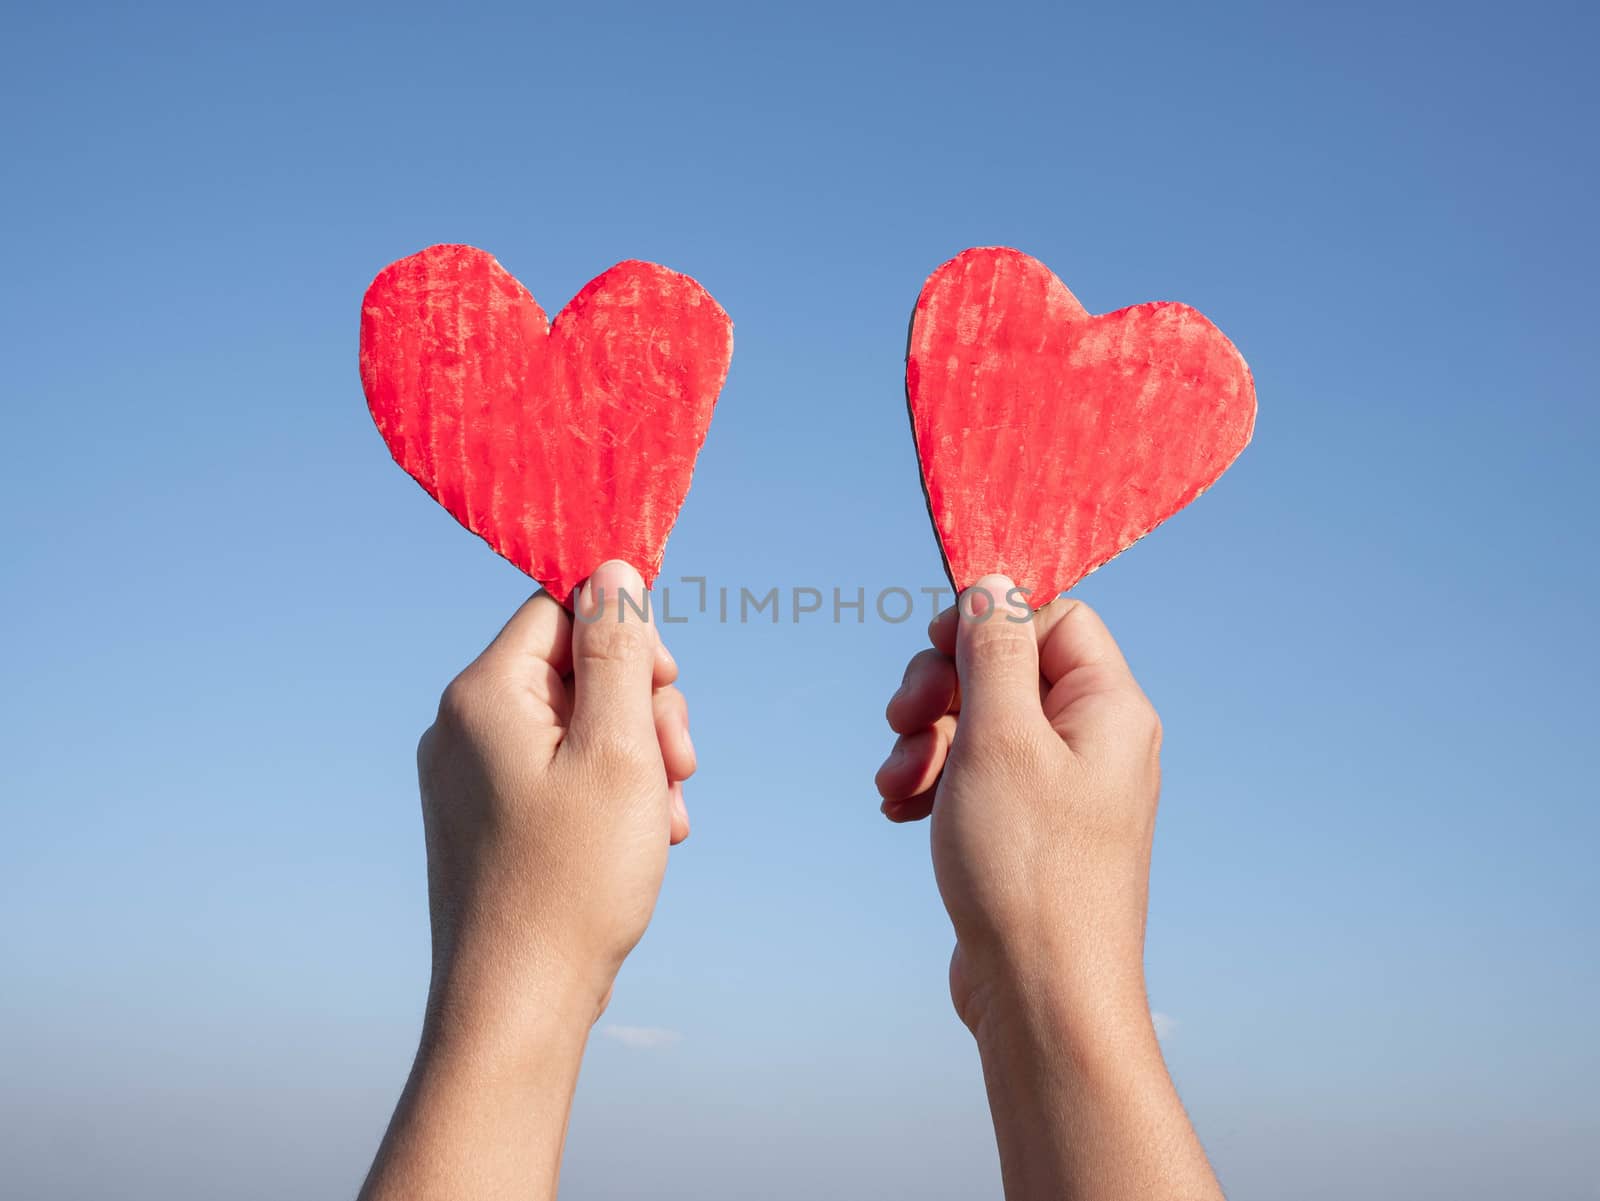 Hands holding two red heart-shaped recycled cardboard on blue sky background. Love symbol for valentines day. Concepts of Love and Romance.